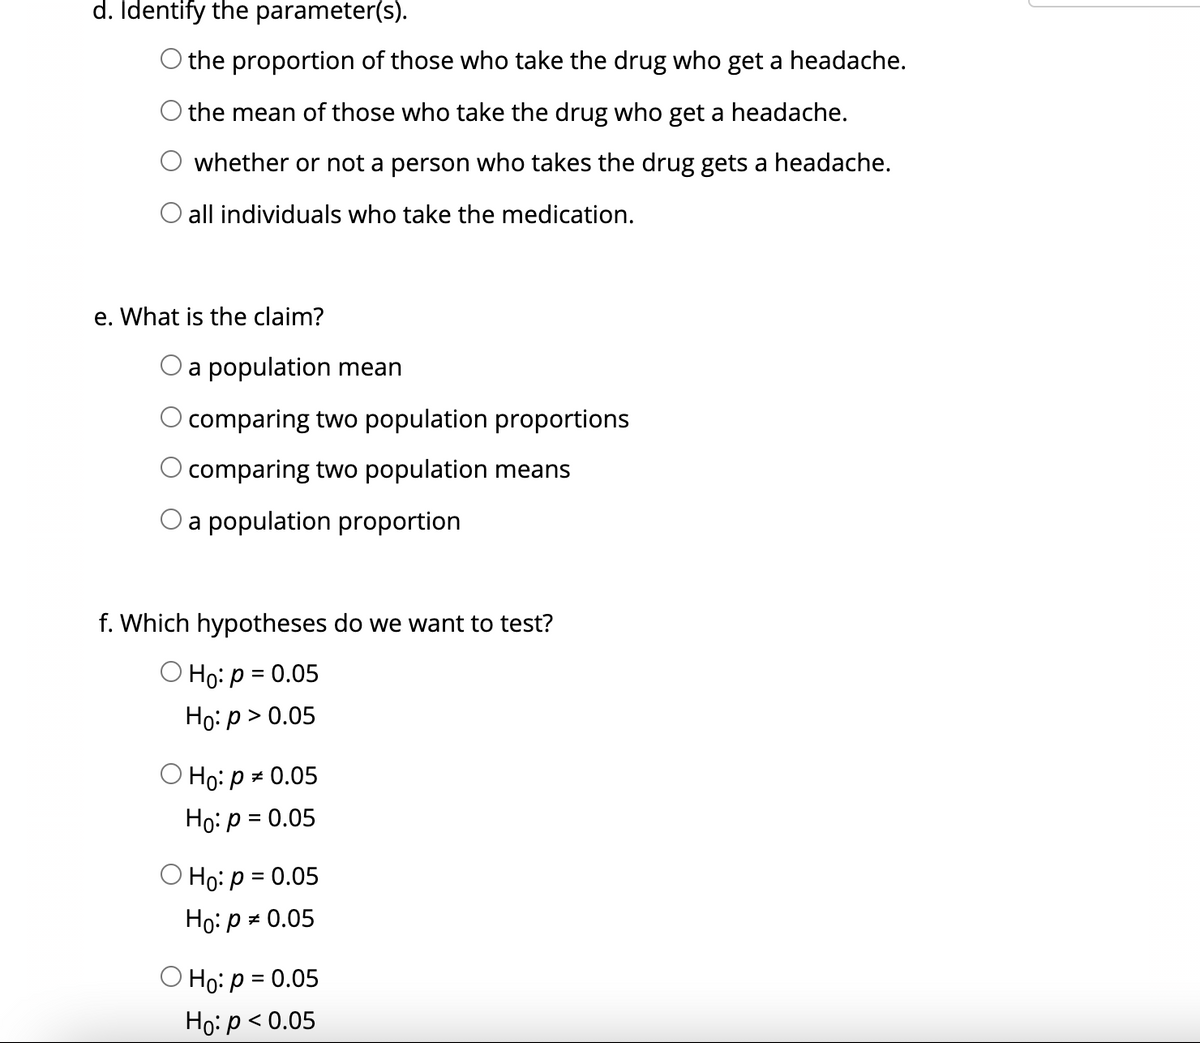 d. Identify the parameter(s).
O the proportion of those who take the drug who get a headache.
the mean of those who take the drug who get a headache.
whether or not a person who takes the drug gets a headache.
all individuals who take the medication.
e. What is the claim?
Oa population mean
comparing two population proportions
O comparing two population means
O a population proportion
f. Which hypotheses do we want to test?
O Ho: p = 0.05
Ho: p > 0.05
О Но: рж 0.05
Hо: р 3 0.05
O Ho: p = 0.05
Ho: p = 0.05
О Но: р 3 0.05
Но р<0.05
